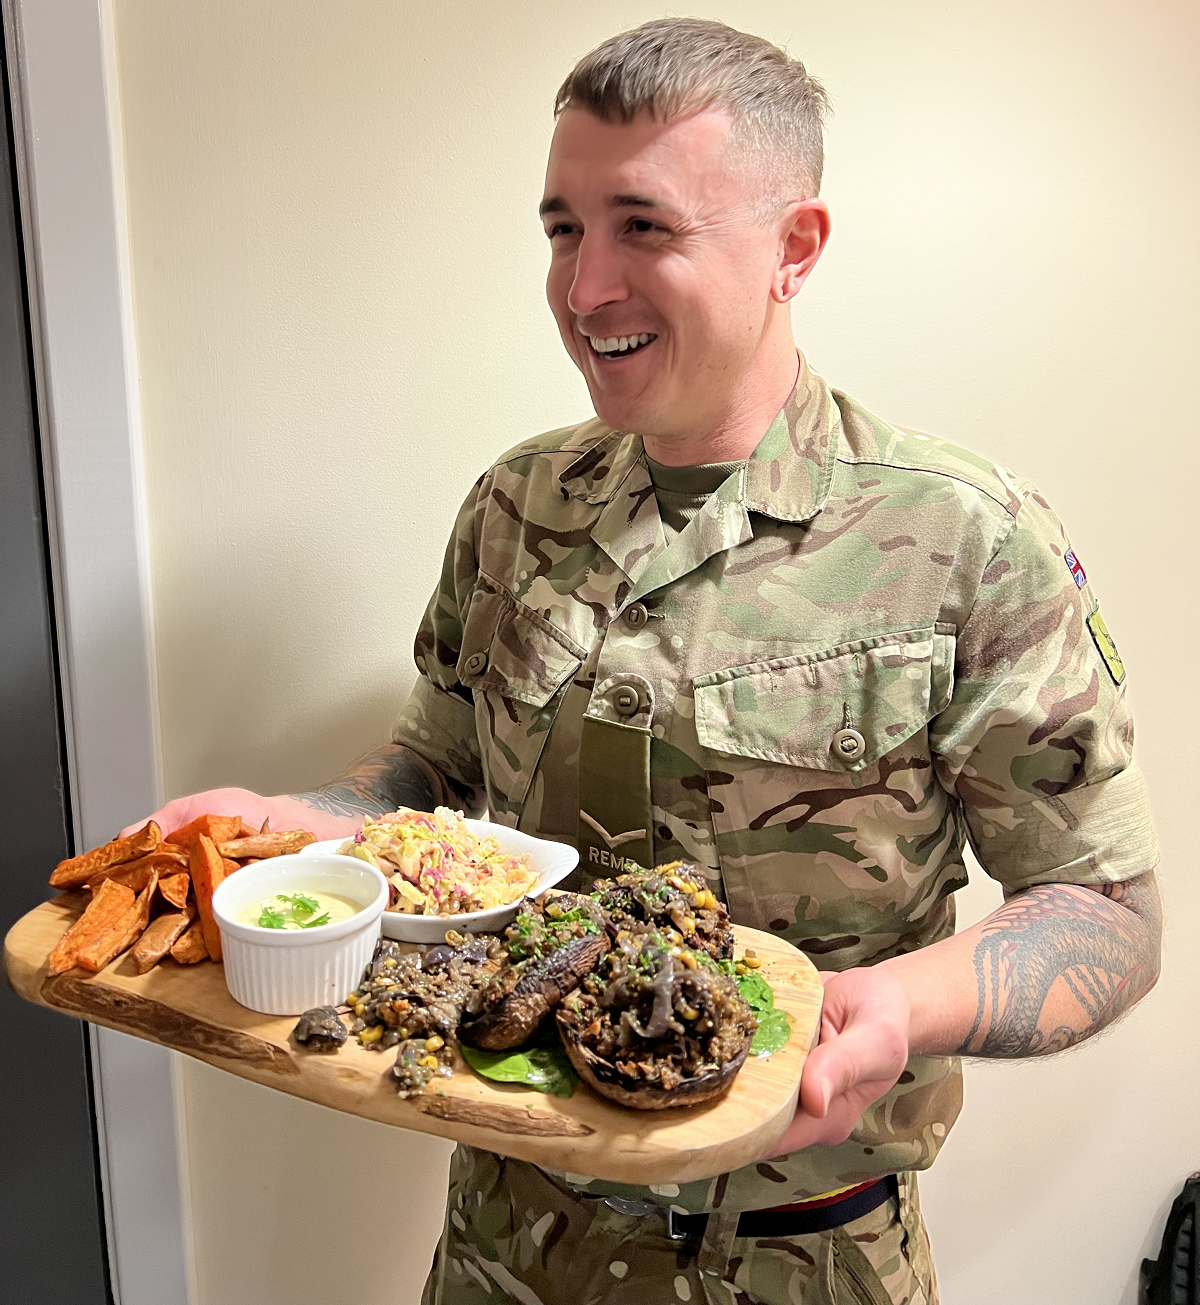 Armed Forces chef instructors at a plant-based culinary masterclass held by Humane Society International, Veganuary and Plant Futures